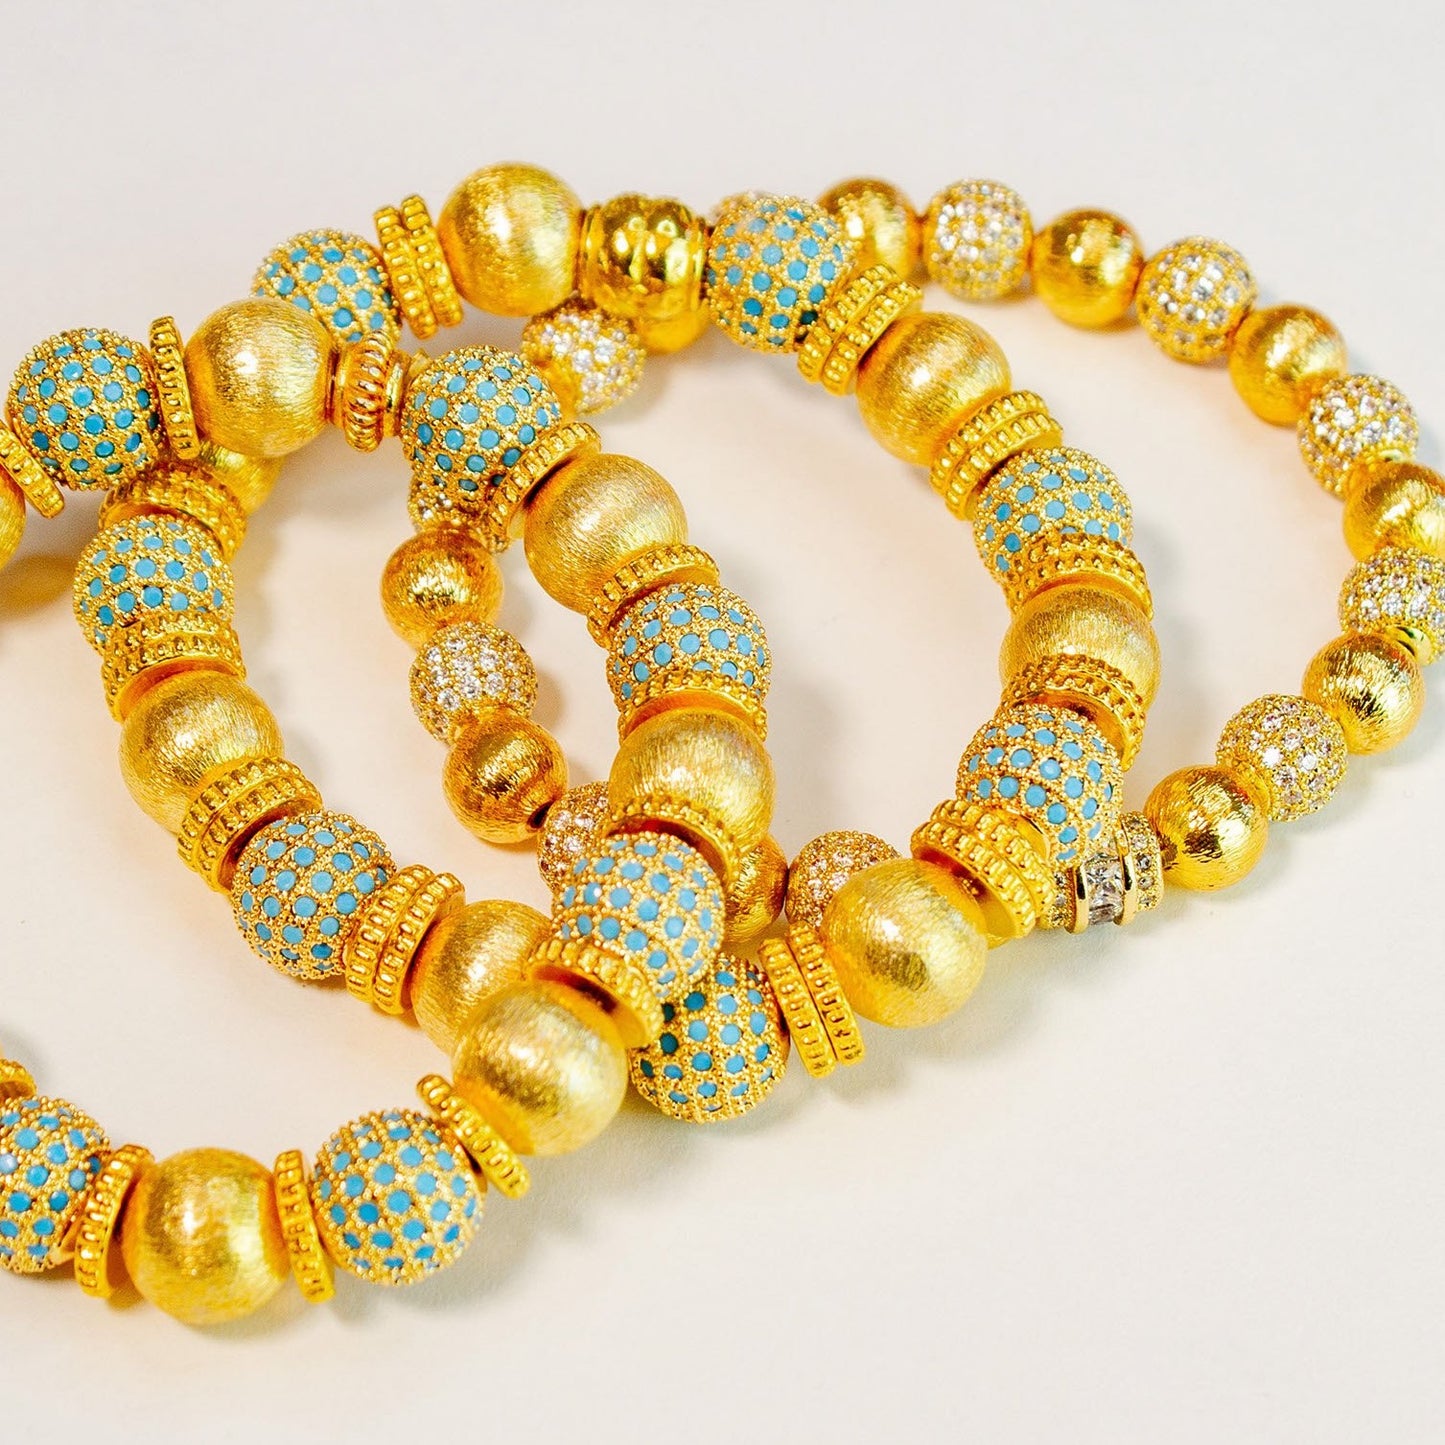 Elegant and Classic 24k Gold Pave Beads and Gold Vermeil Beaded 7" Bracelet